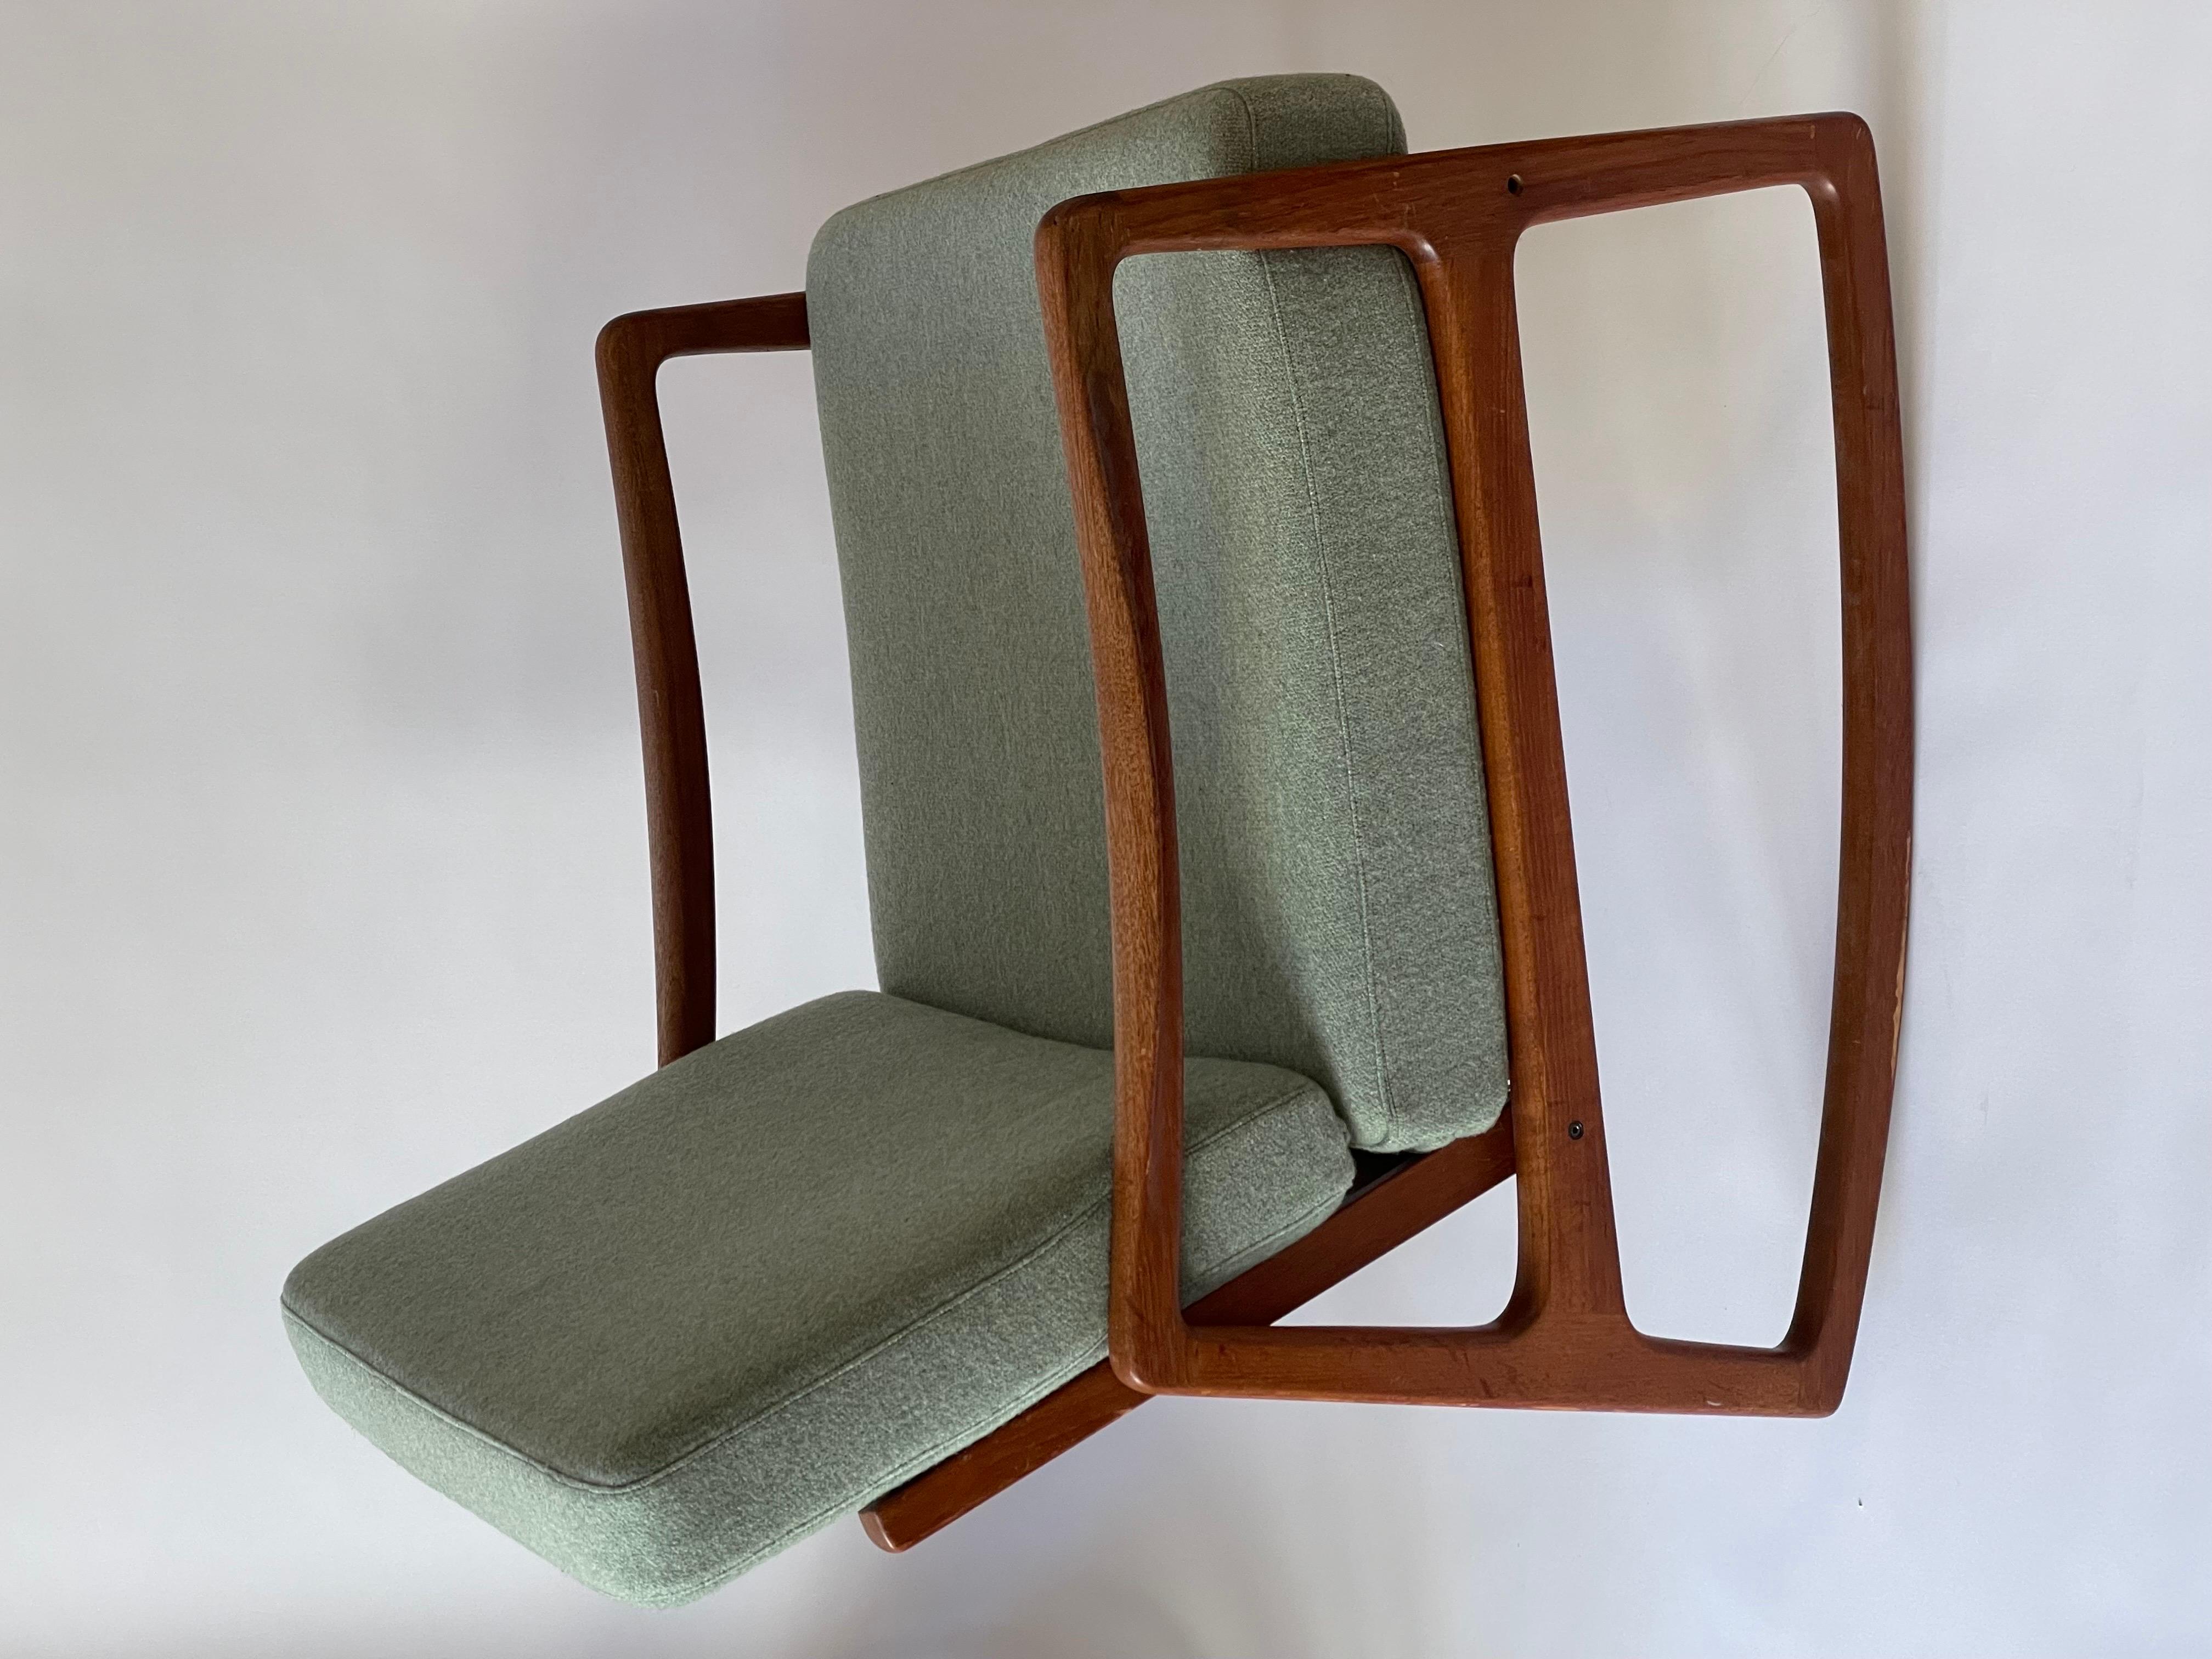 Scandinavian Modern Danish Teak Rocking Chair by Ole Wanscher 1950s with New Upholstery For Sale